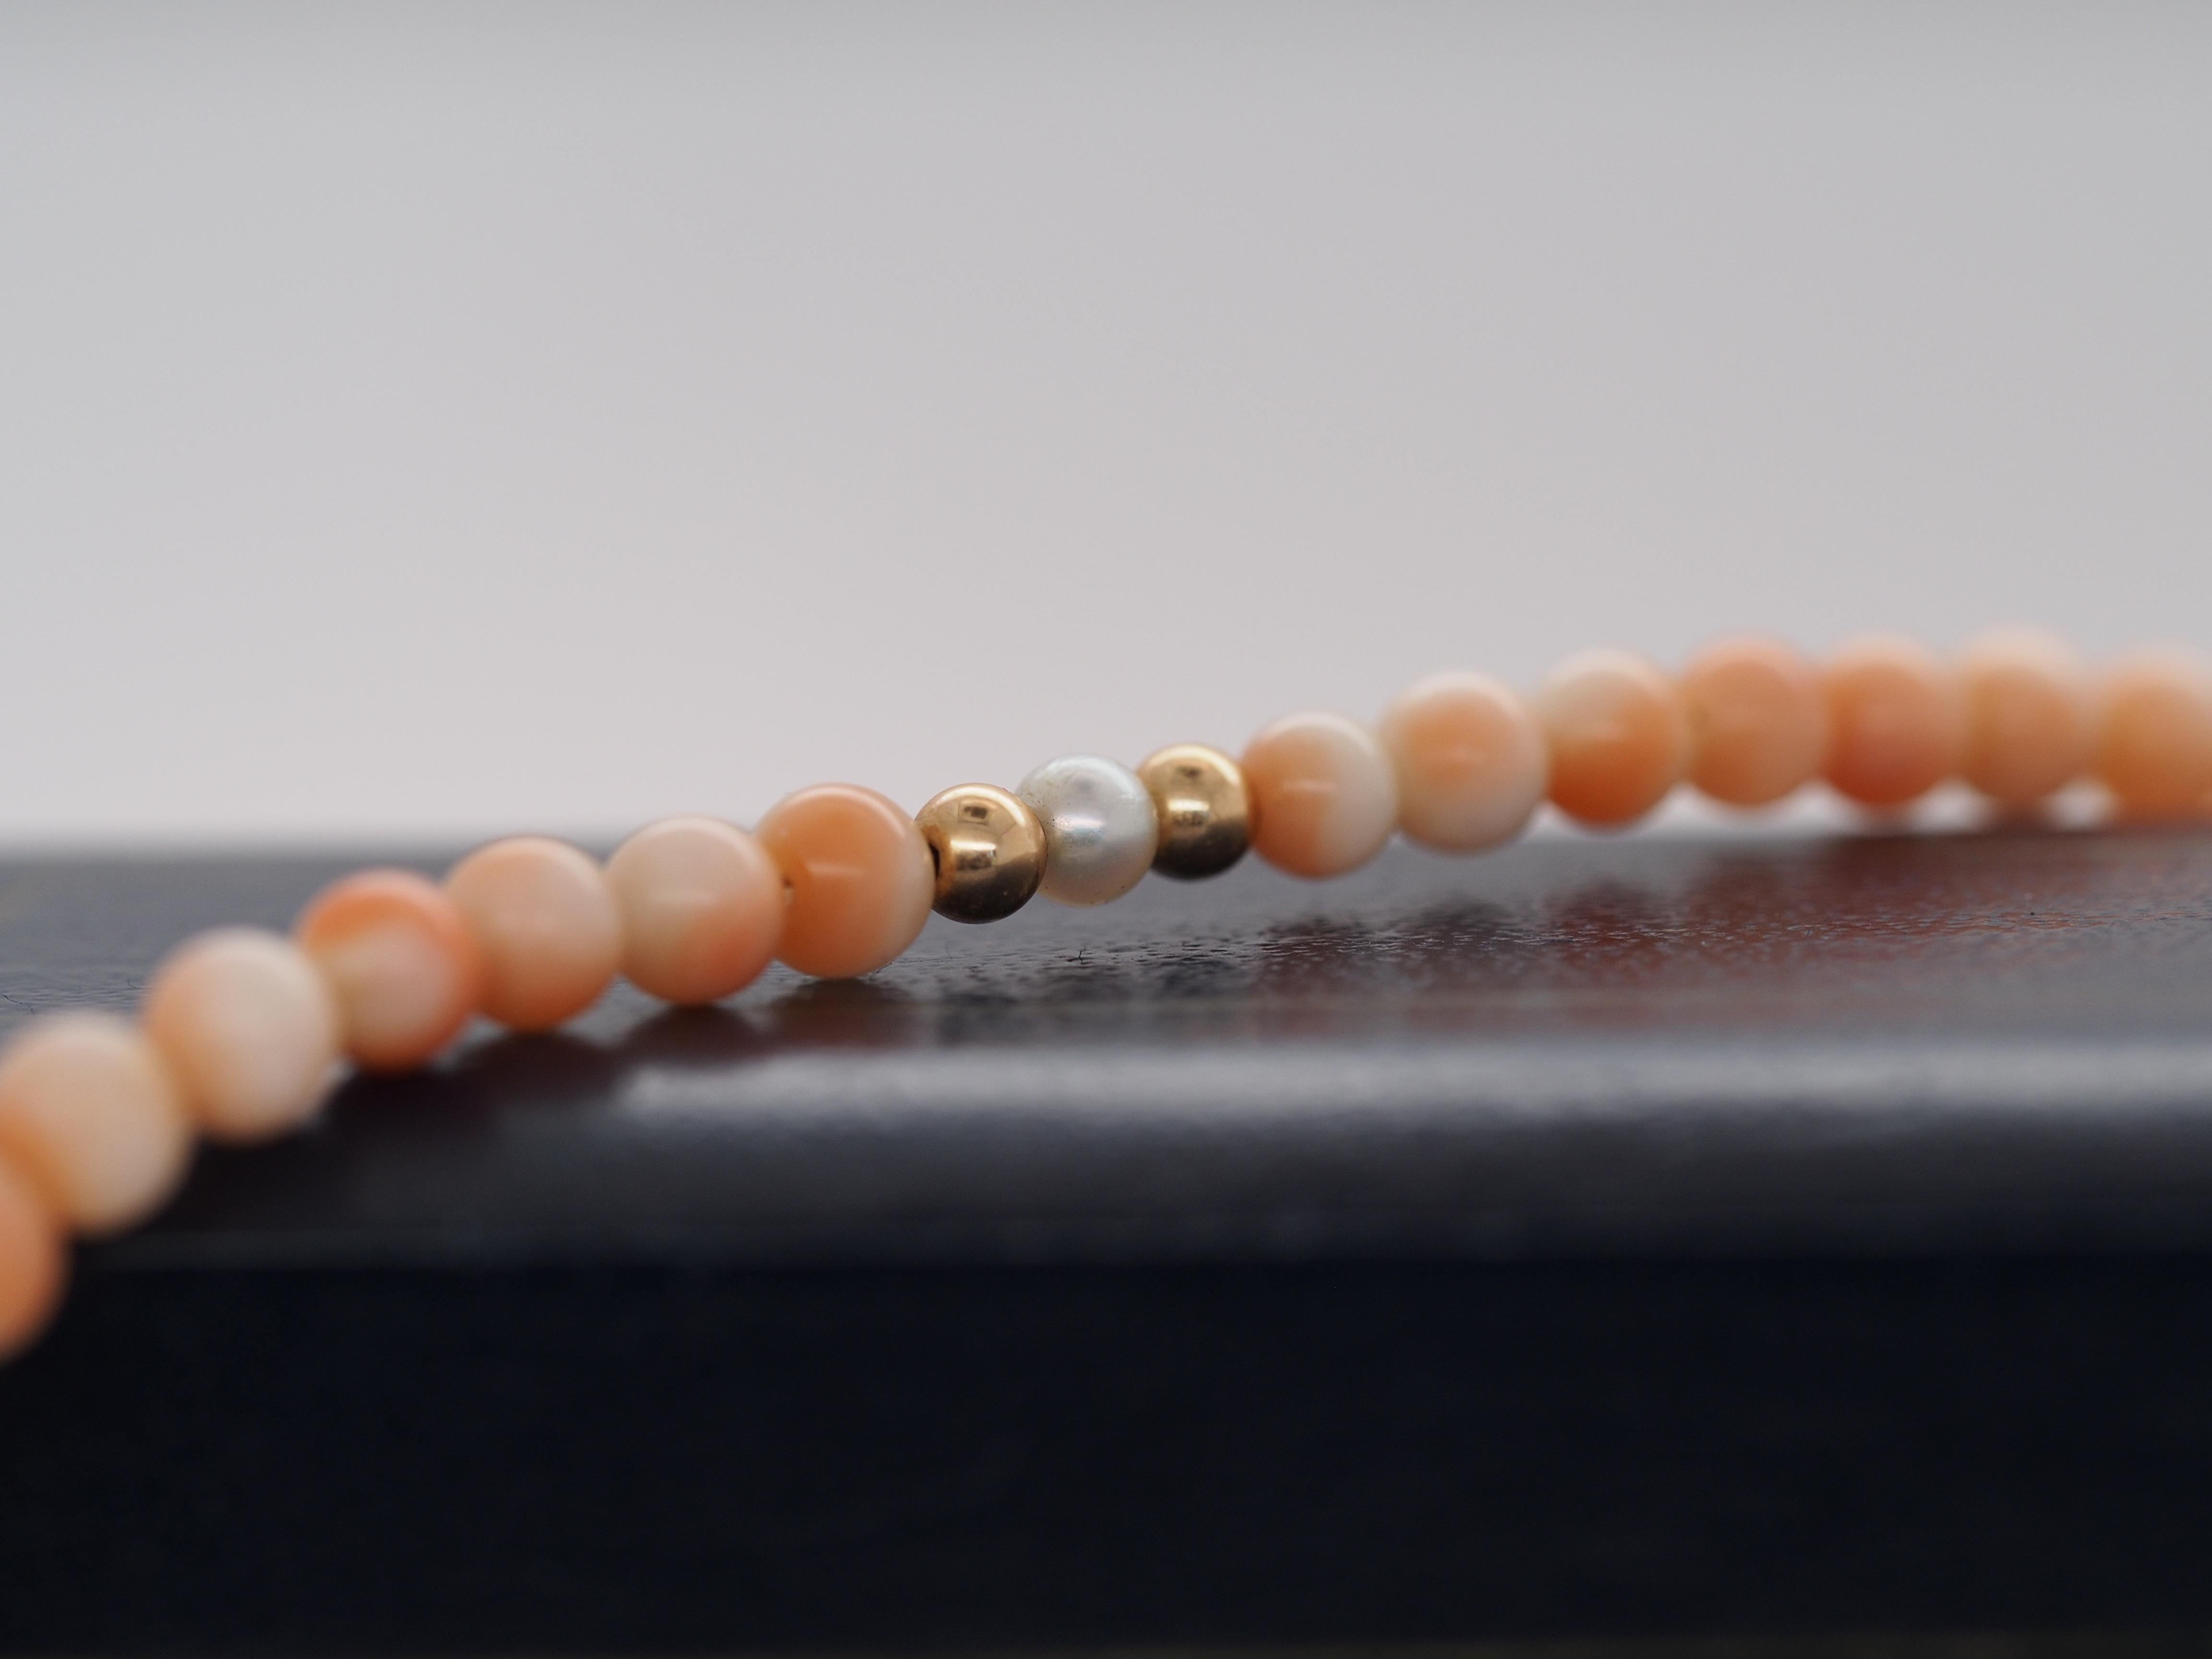 14k Yellow Gold Coral Bead Necklace with 14k Beads and Pearls For Sale 1